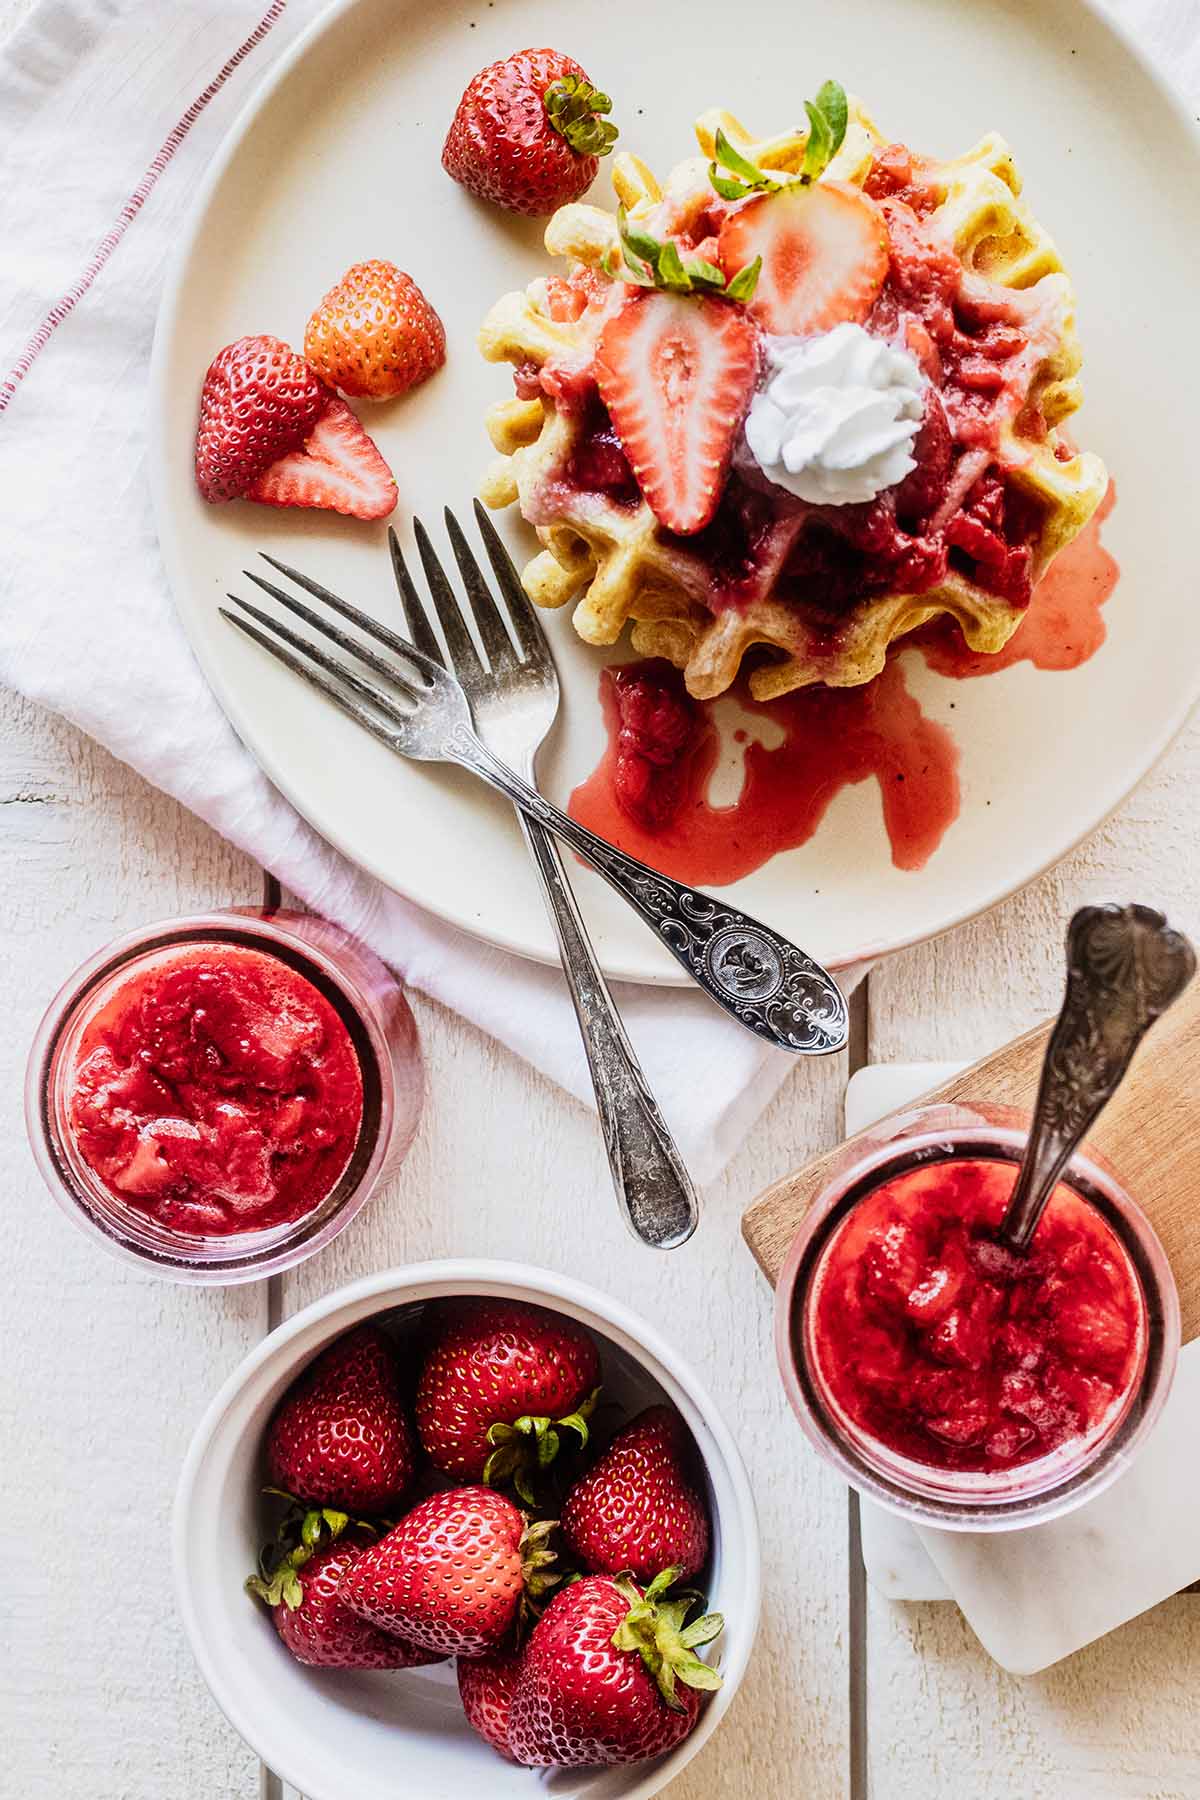 Overhead view of 2 jars of strawberry compote, a bowl of strawberries, and compote-covered waffles on a white plate with a fork